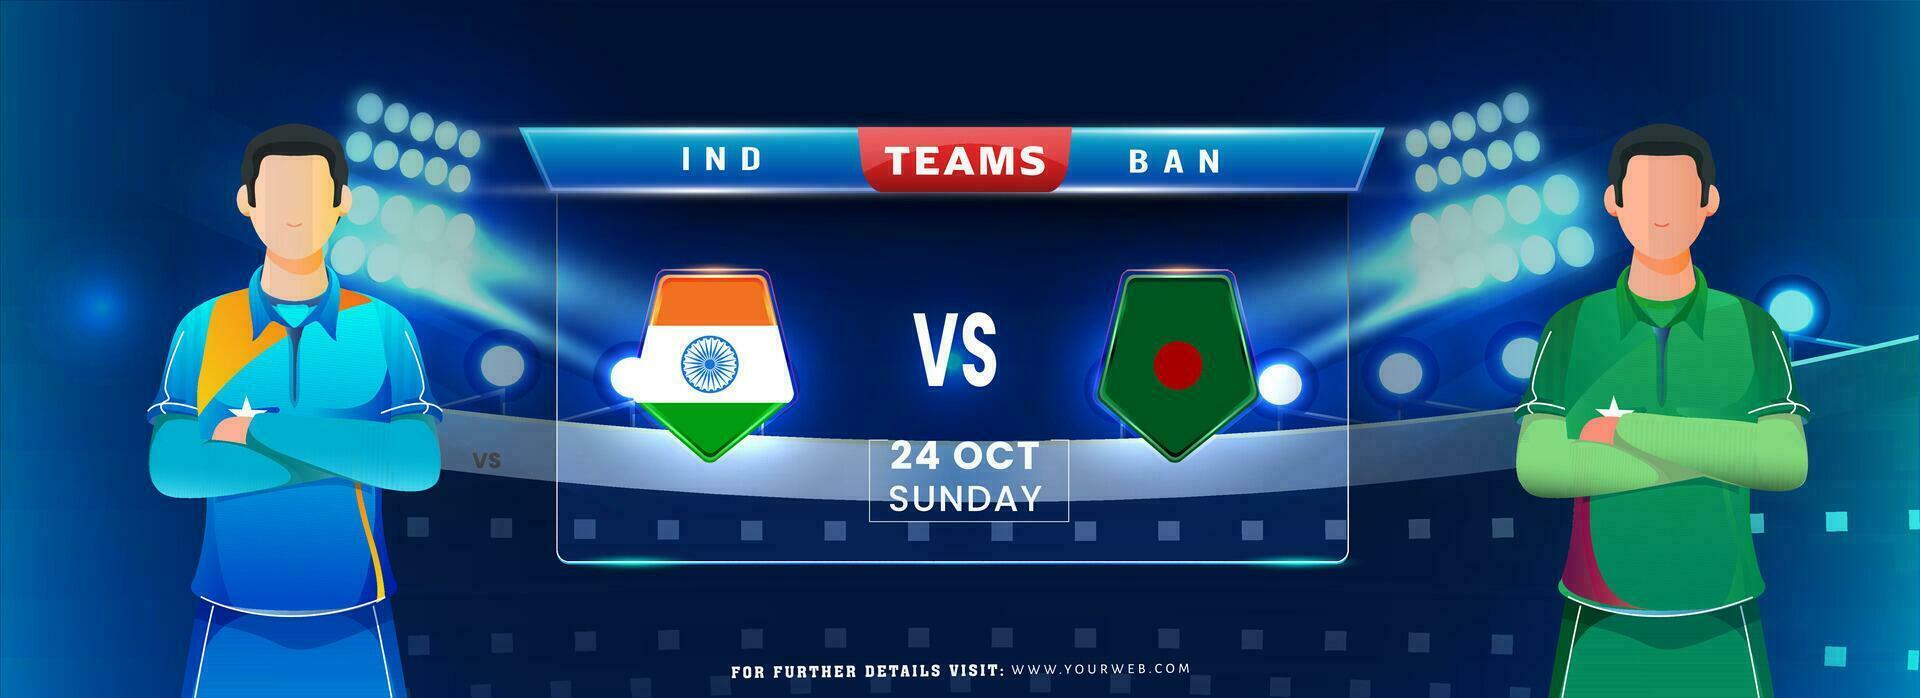 Cricket Match Between India VS Bangladesh Team with Faceless Cricket Players on Blue Stadium Lighting Background. vector